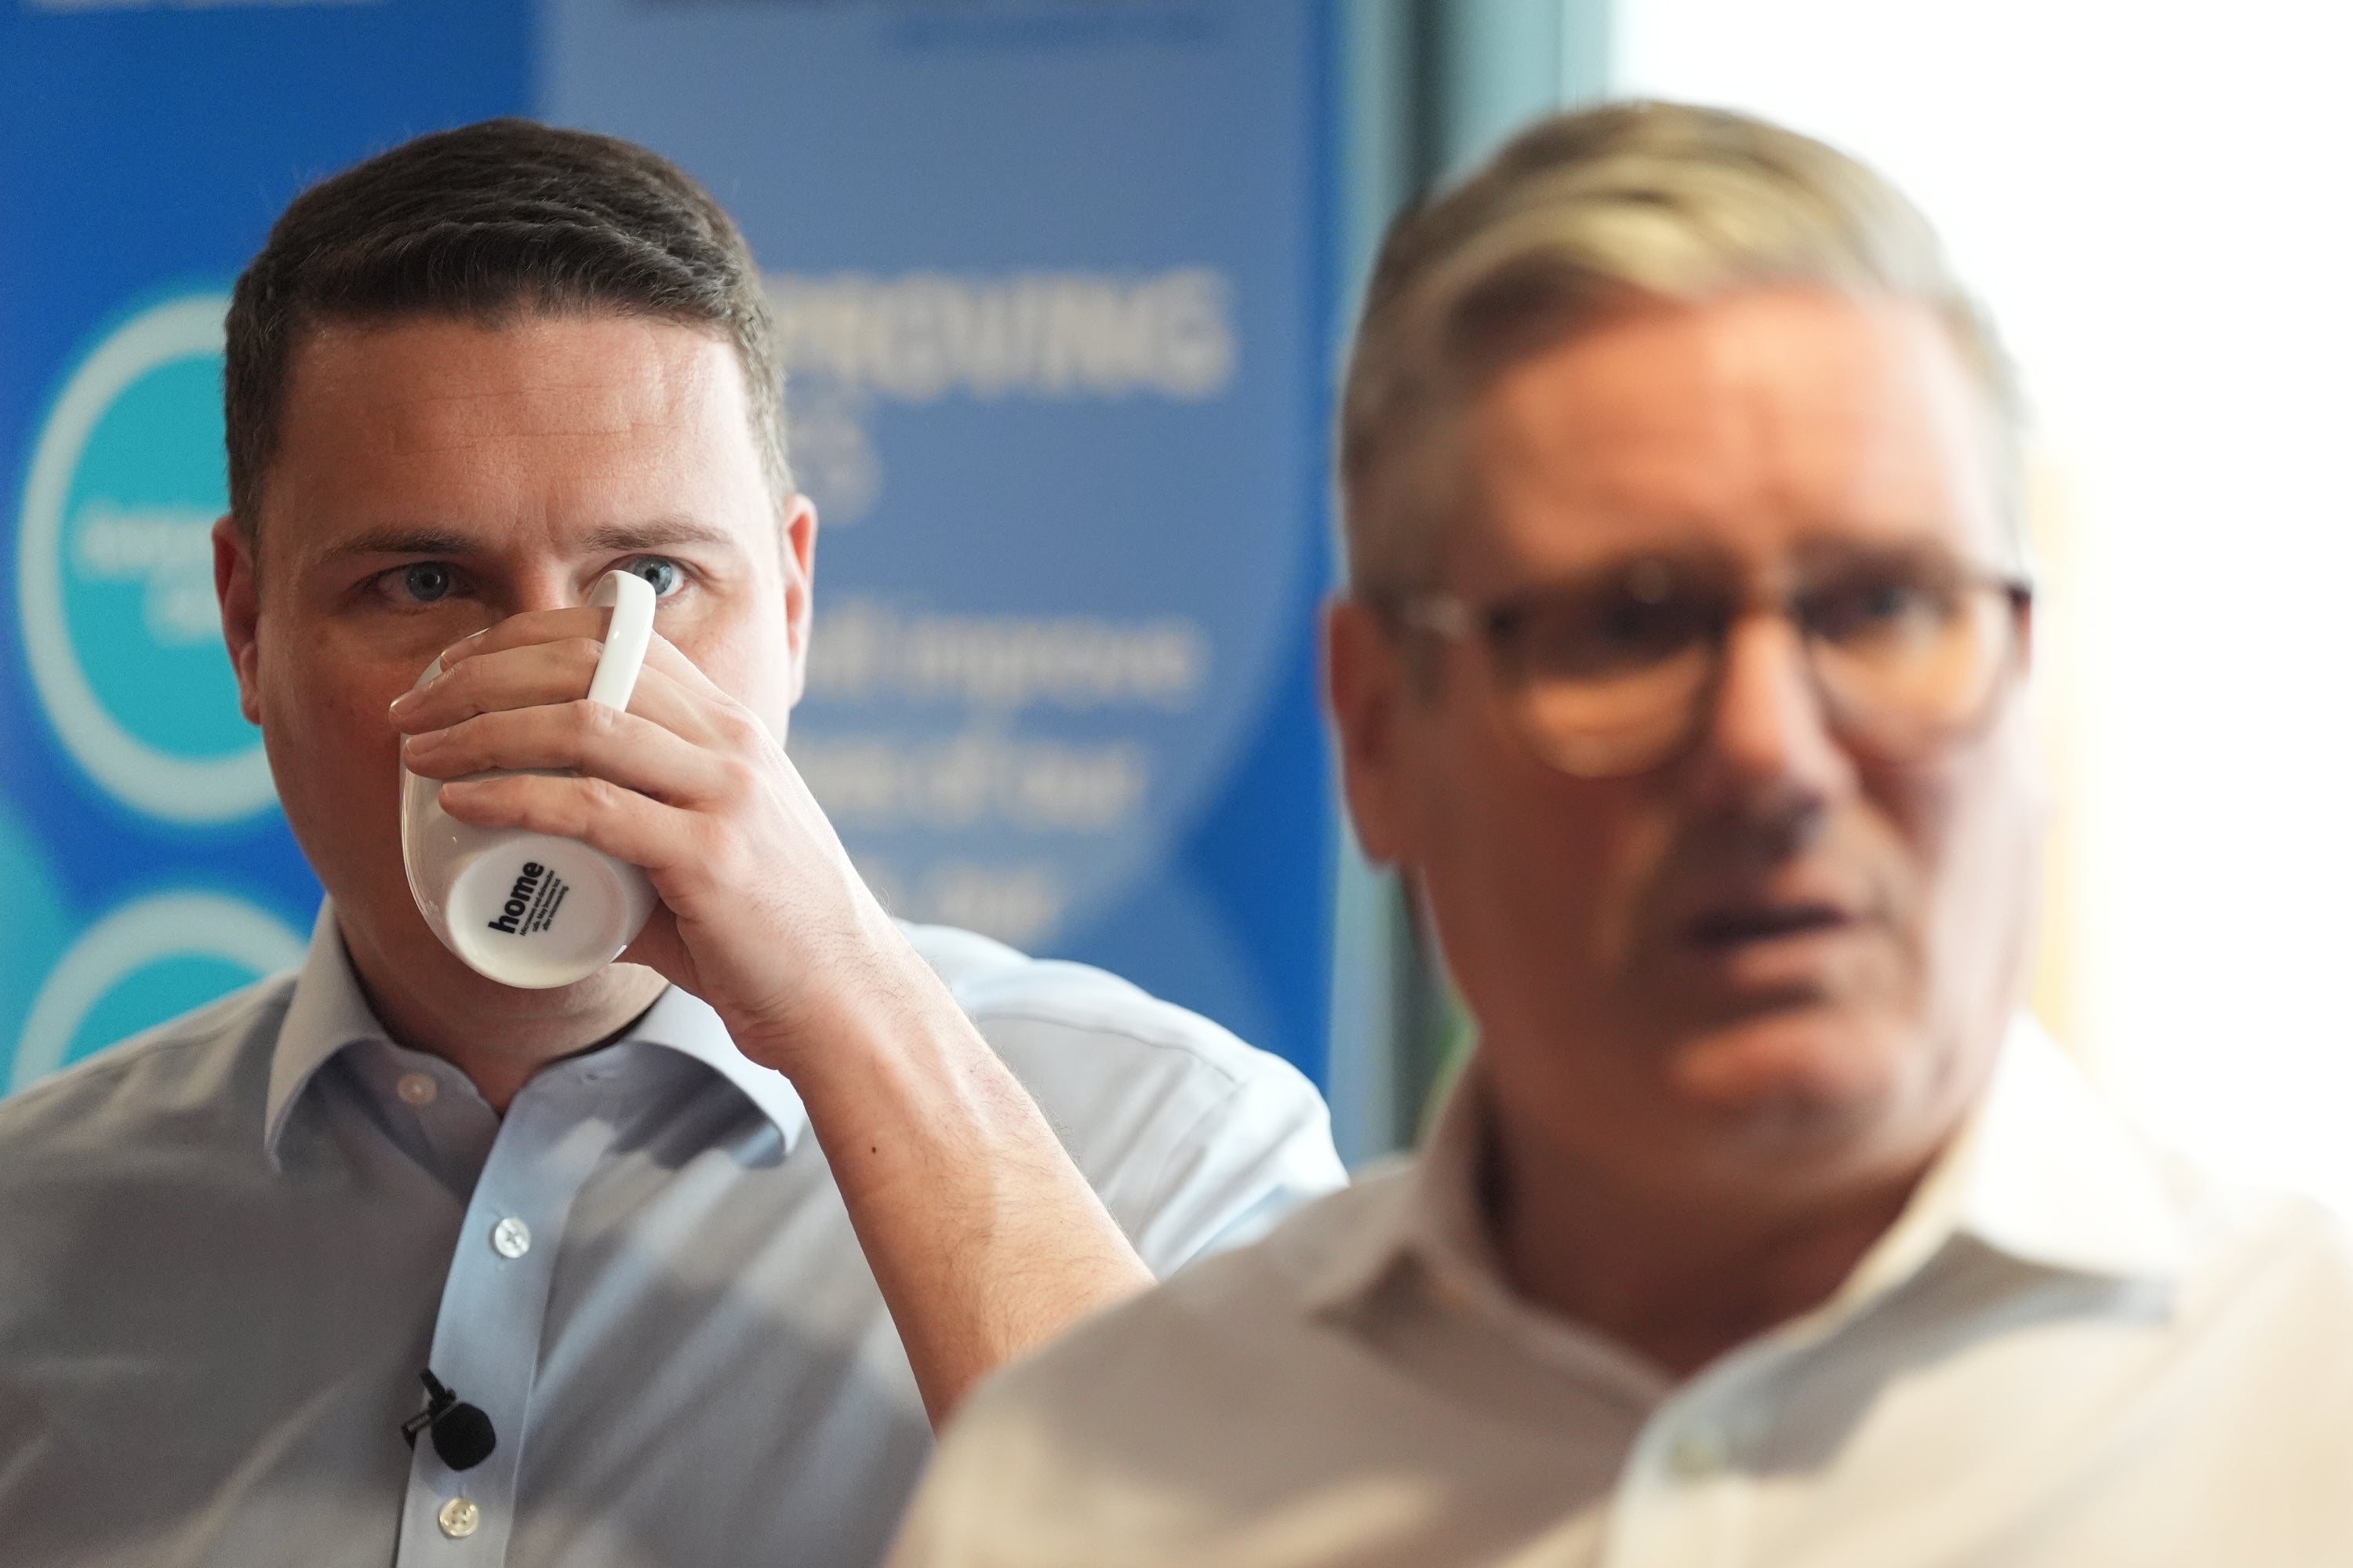 Labour leader Sir Keir Starmer (right) and shadow health secretary Wes Streeting, during a visit to Kings Mill Hospital